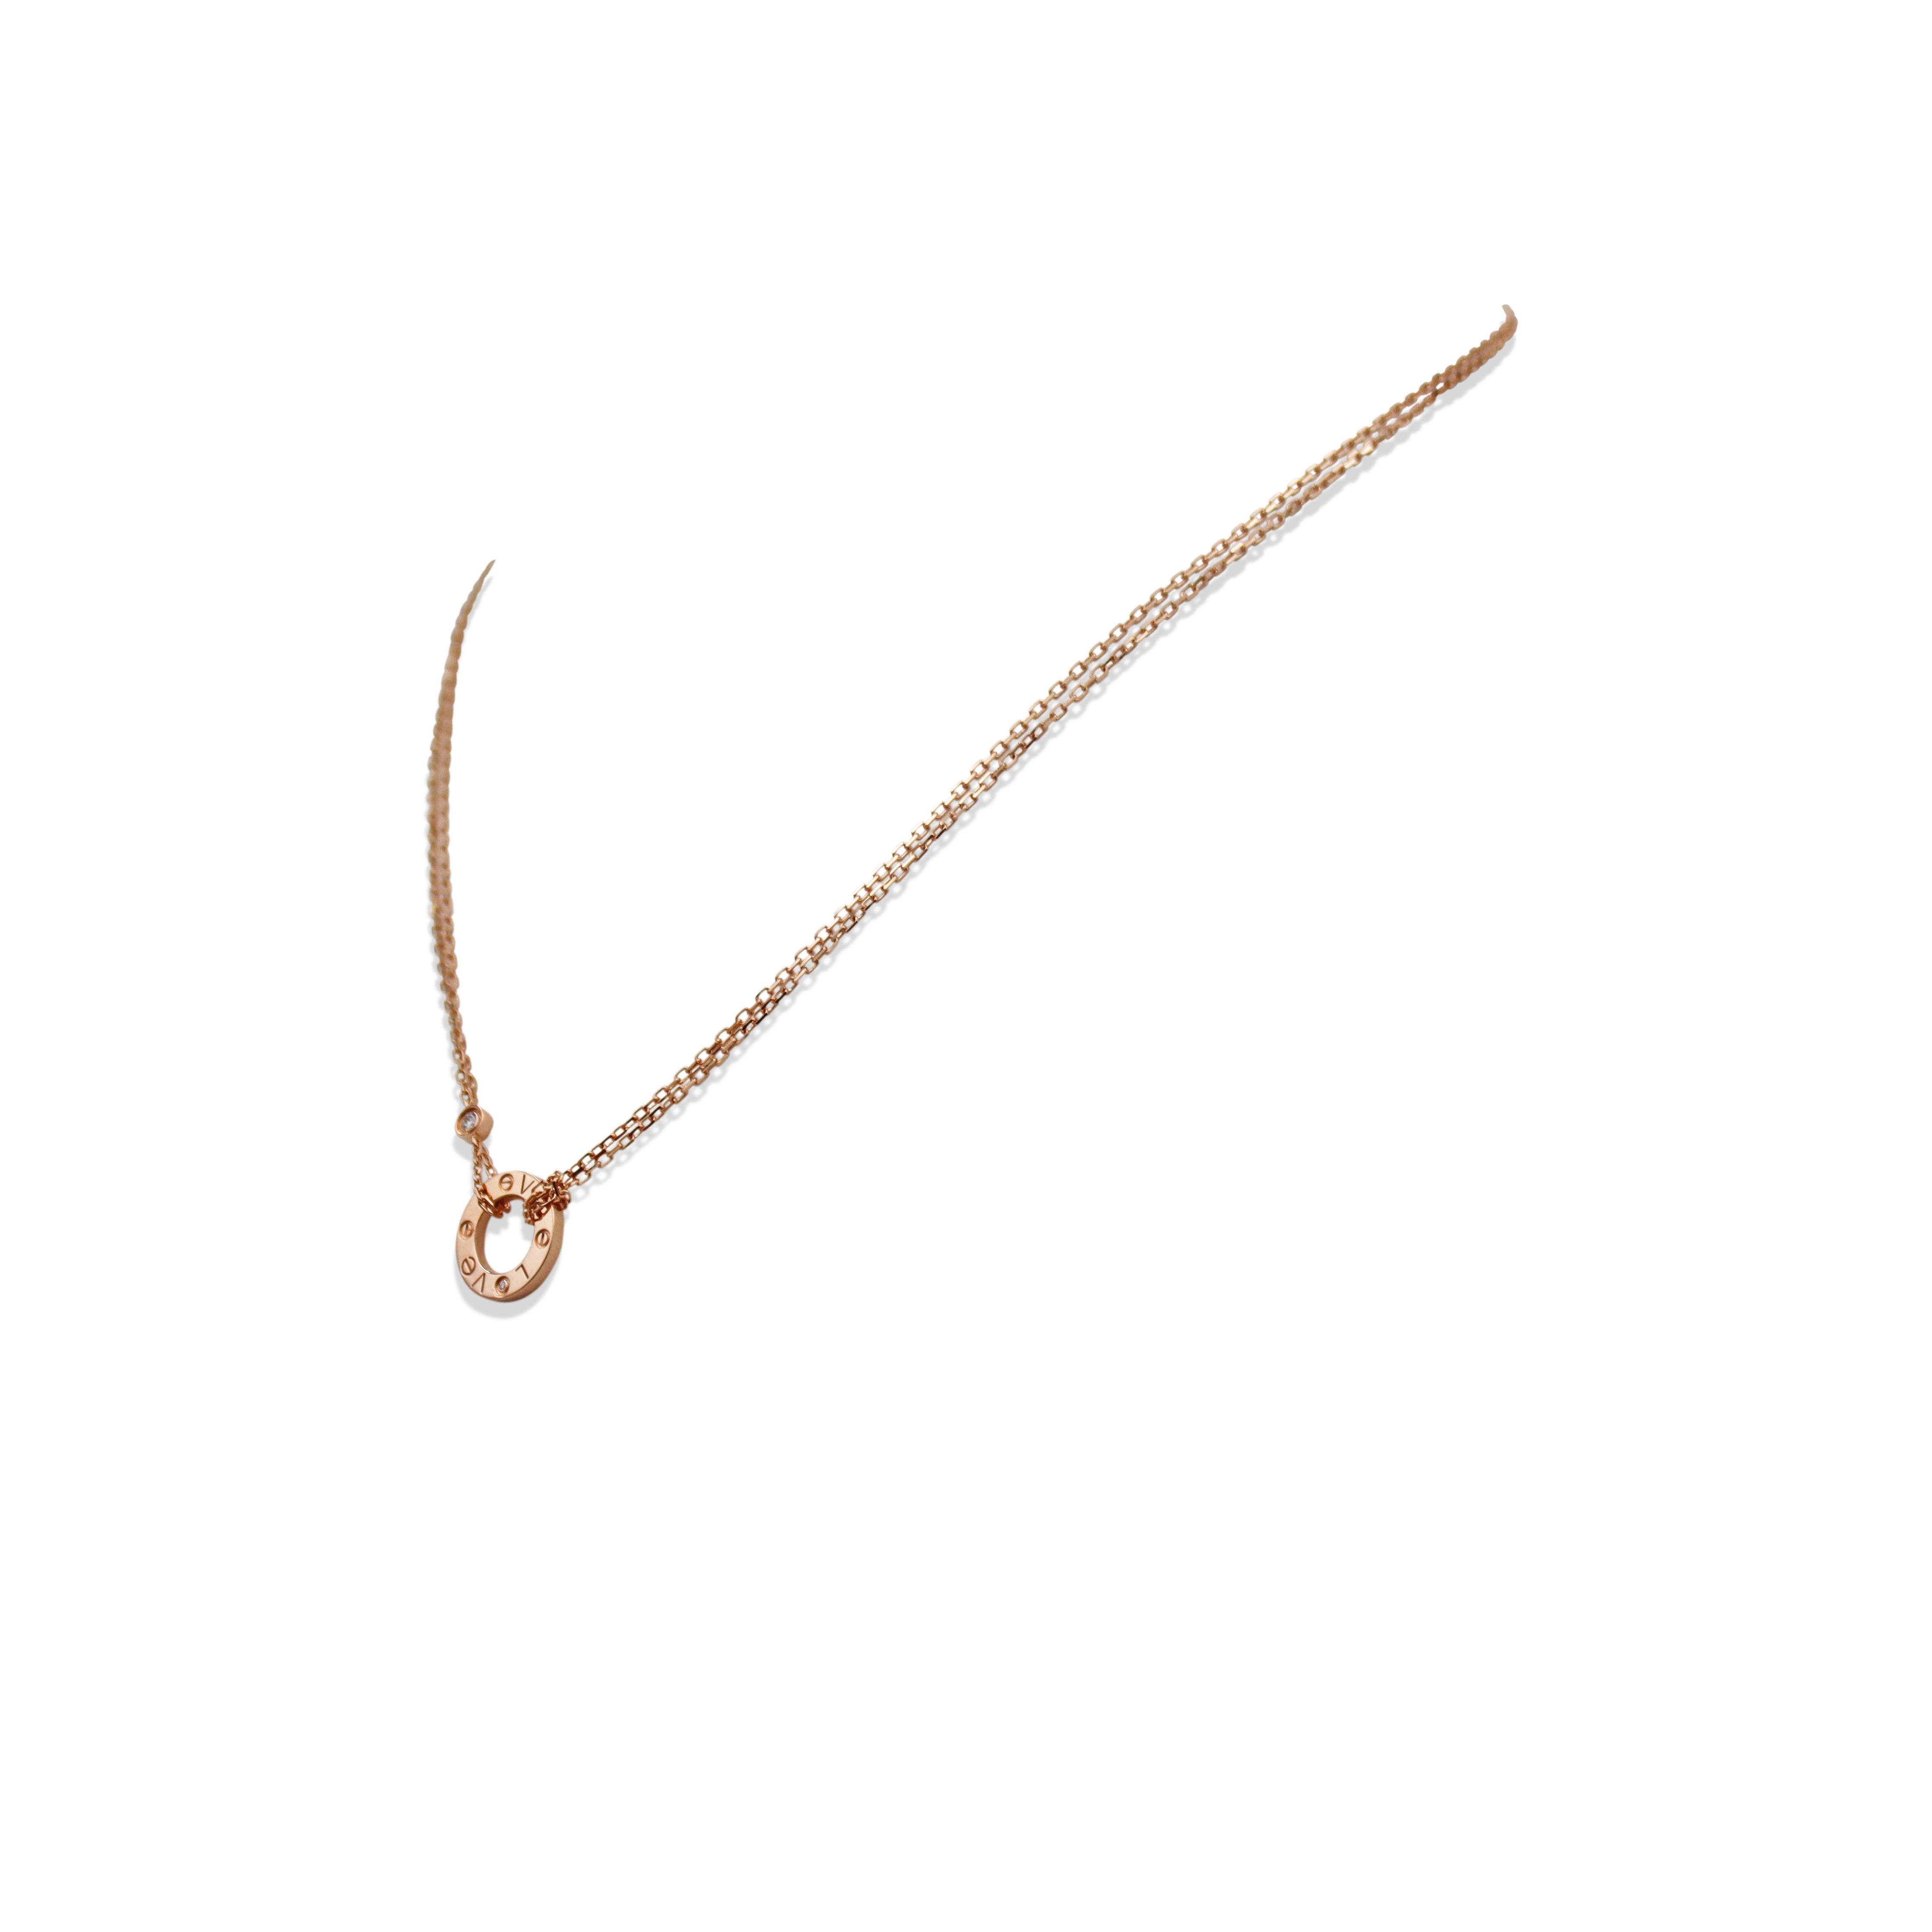 Authentic chain and ring charm necklace from the Cartier 'Love' collection. Crafted in 18 karat rose gold, the double strand oval link chain features a half-inch round ring and screw top motifs set with two round brilliant cut diamonds of